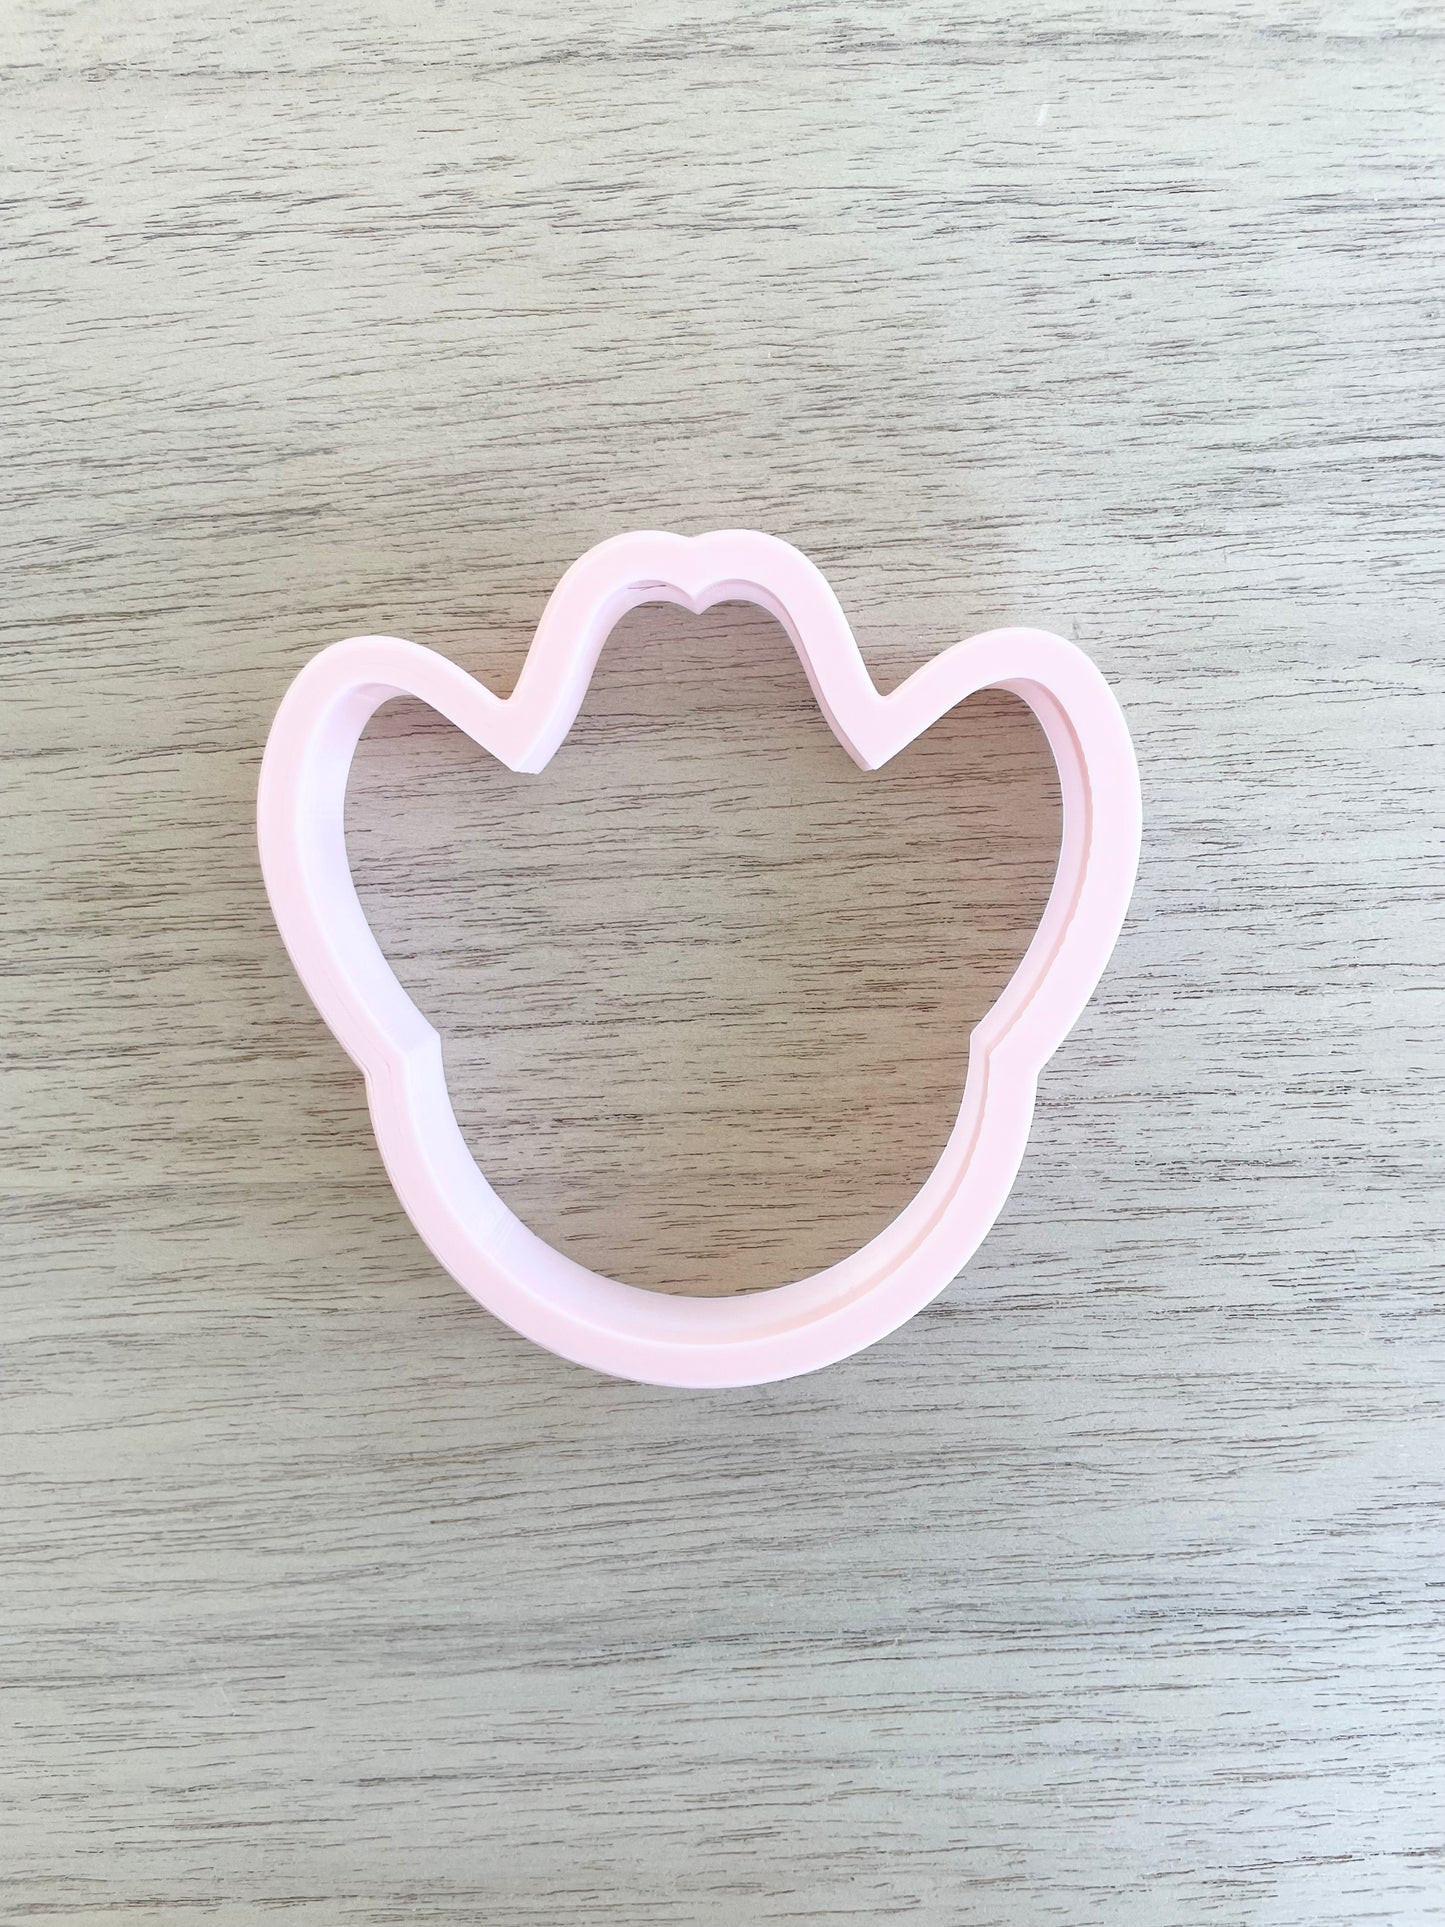 Smiley Face with Cowboy Hat Cookie Cutter